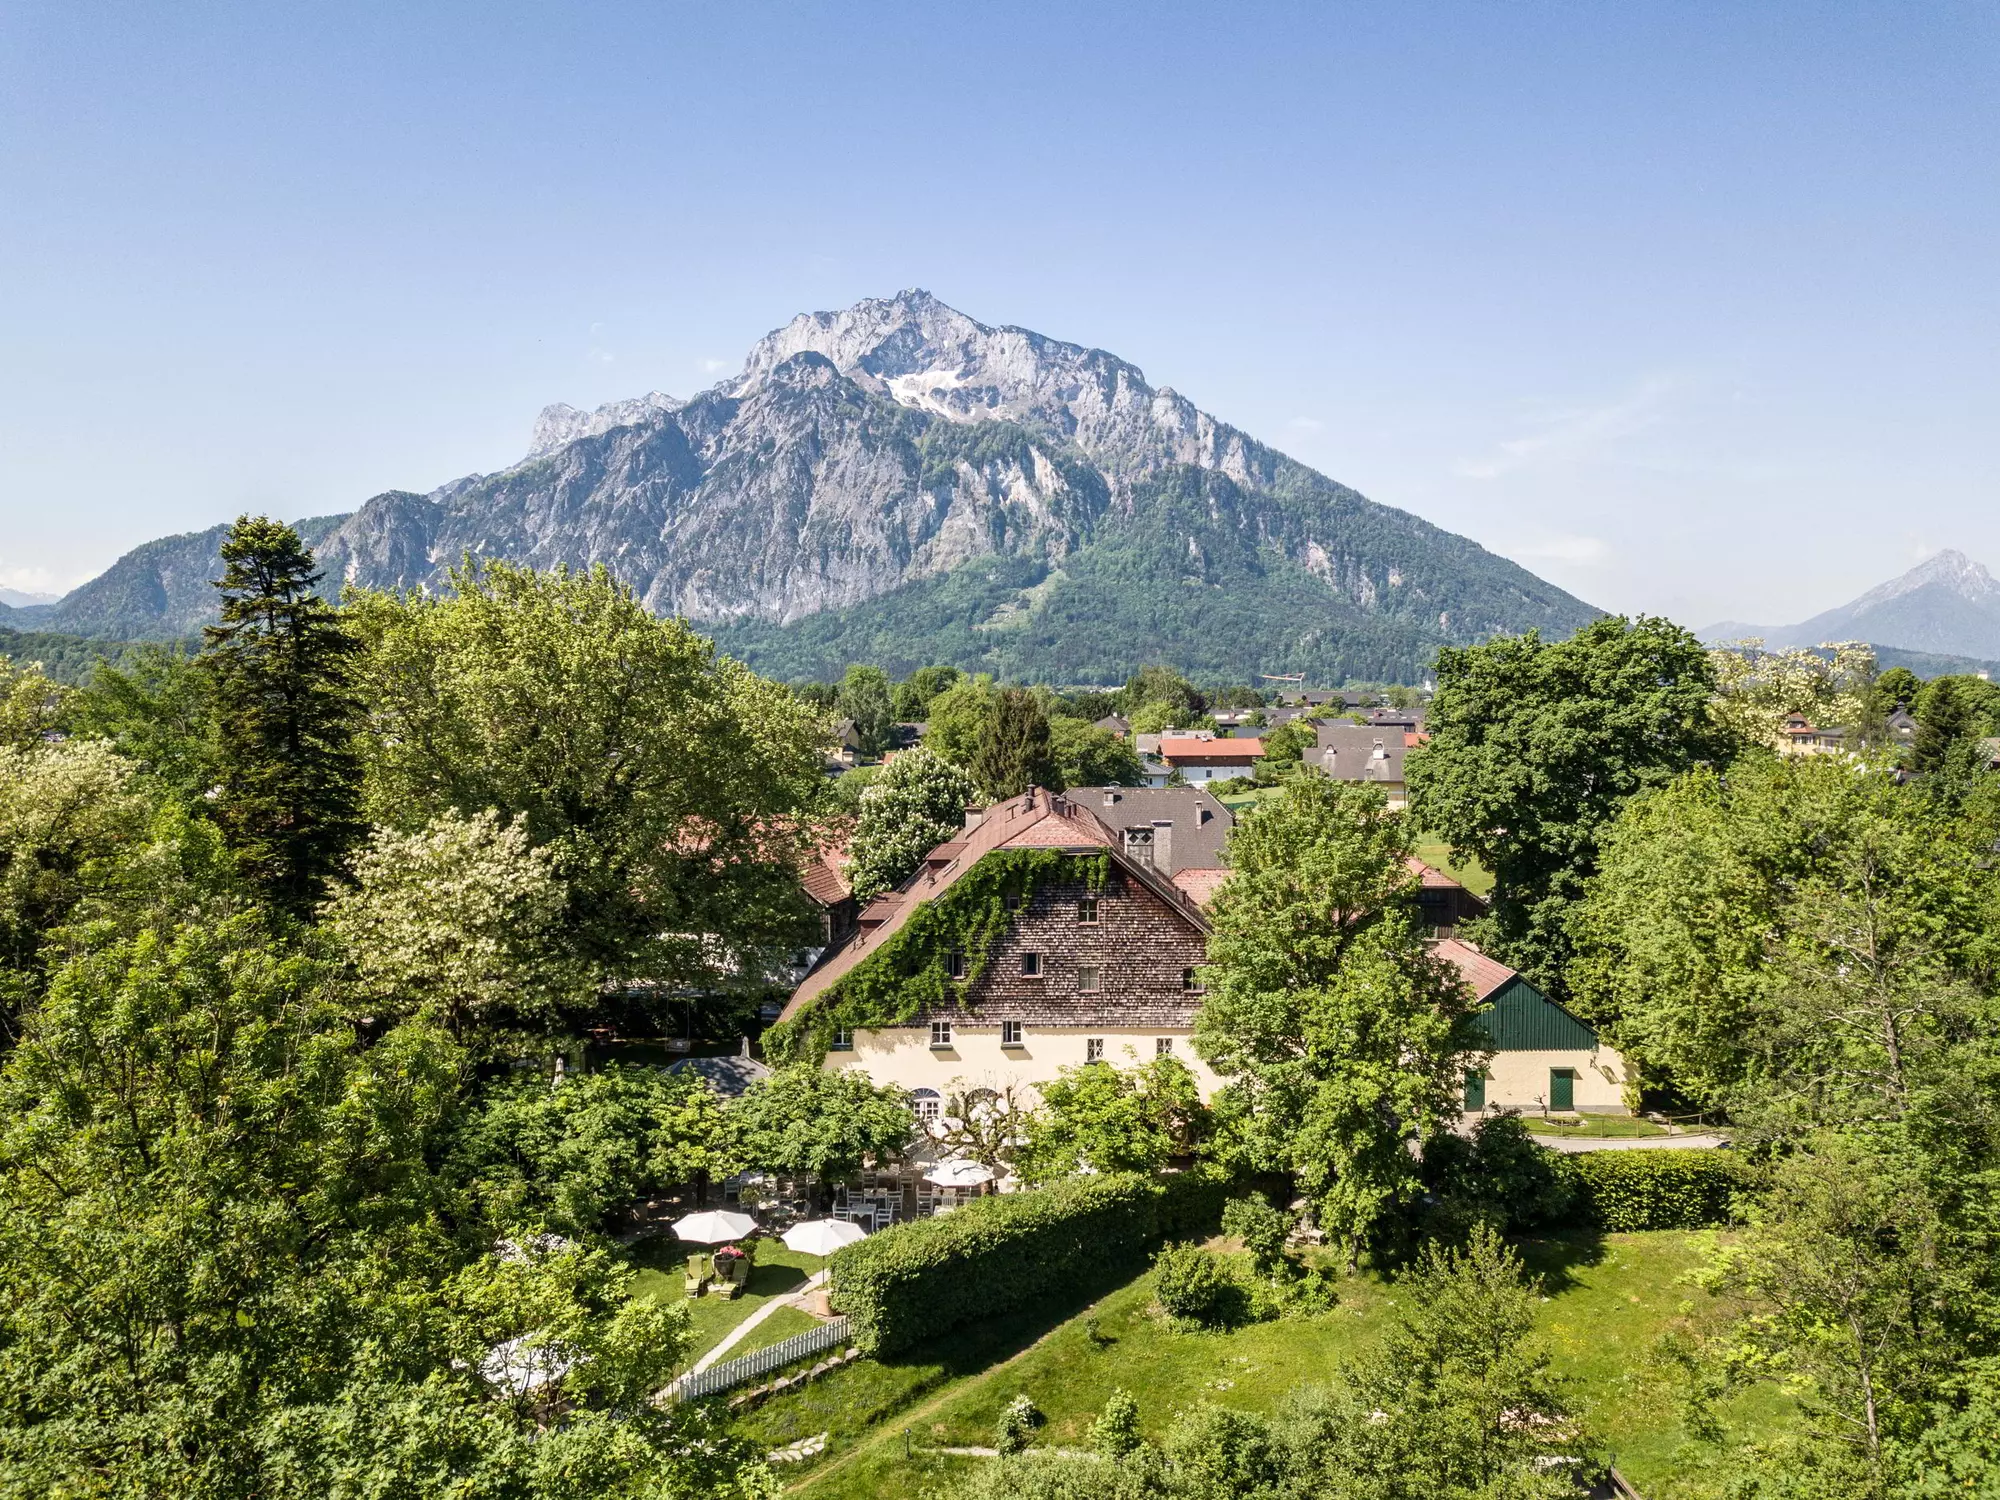 Aerial view of the Schlosswirt zu Anif in the middle of greenery with the Untersberg in the background (c) Photo Schlosswirt zu Anif